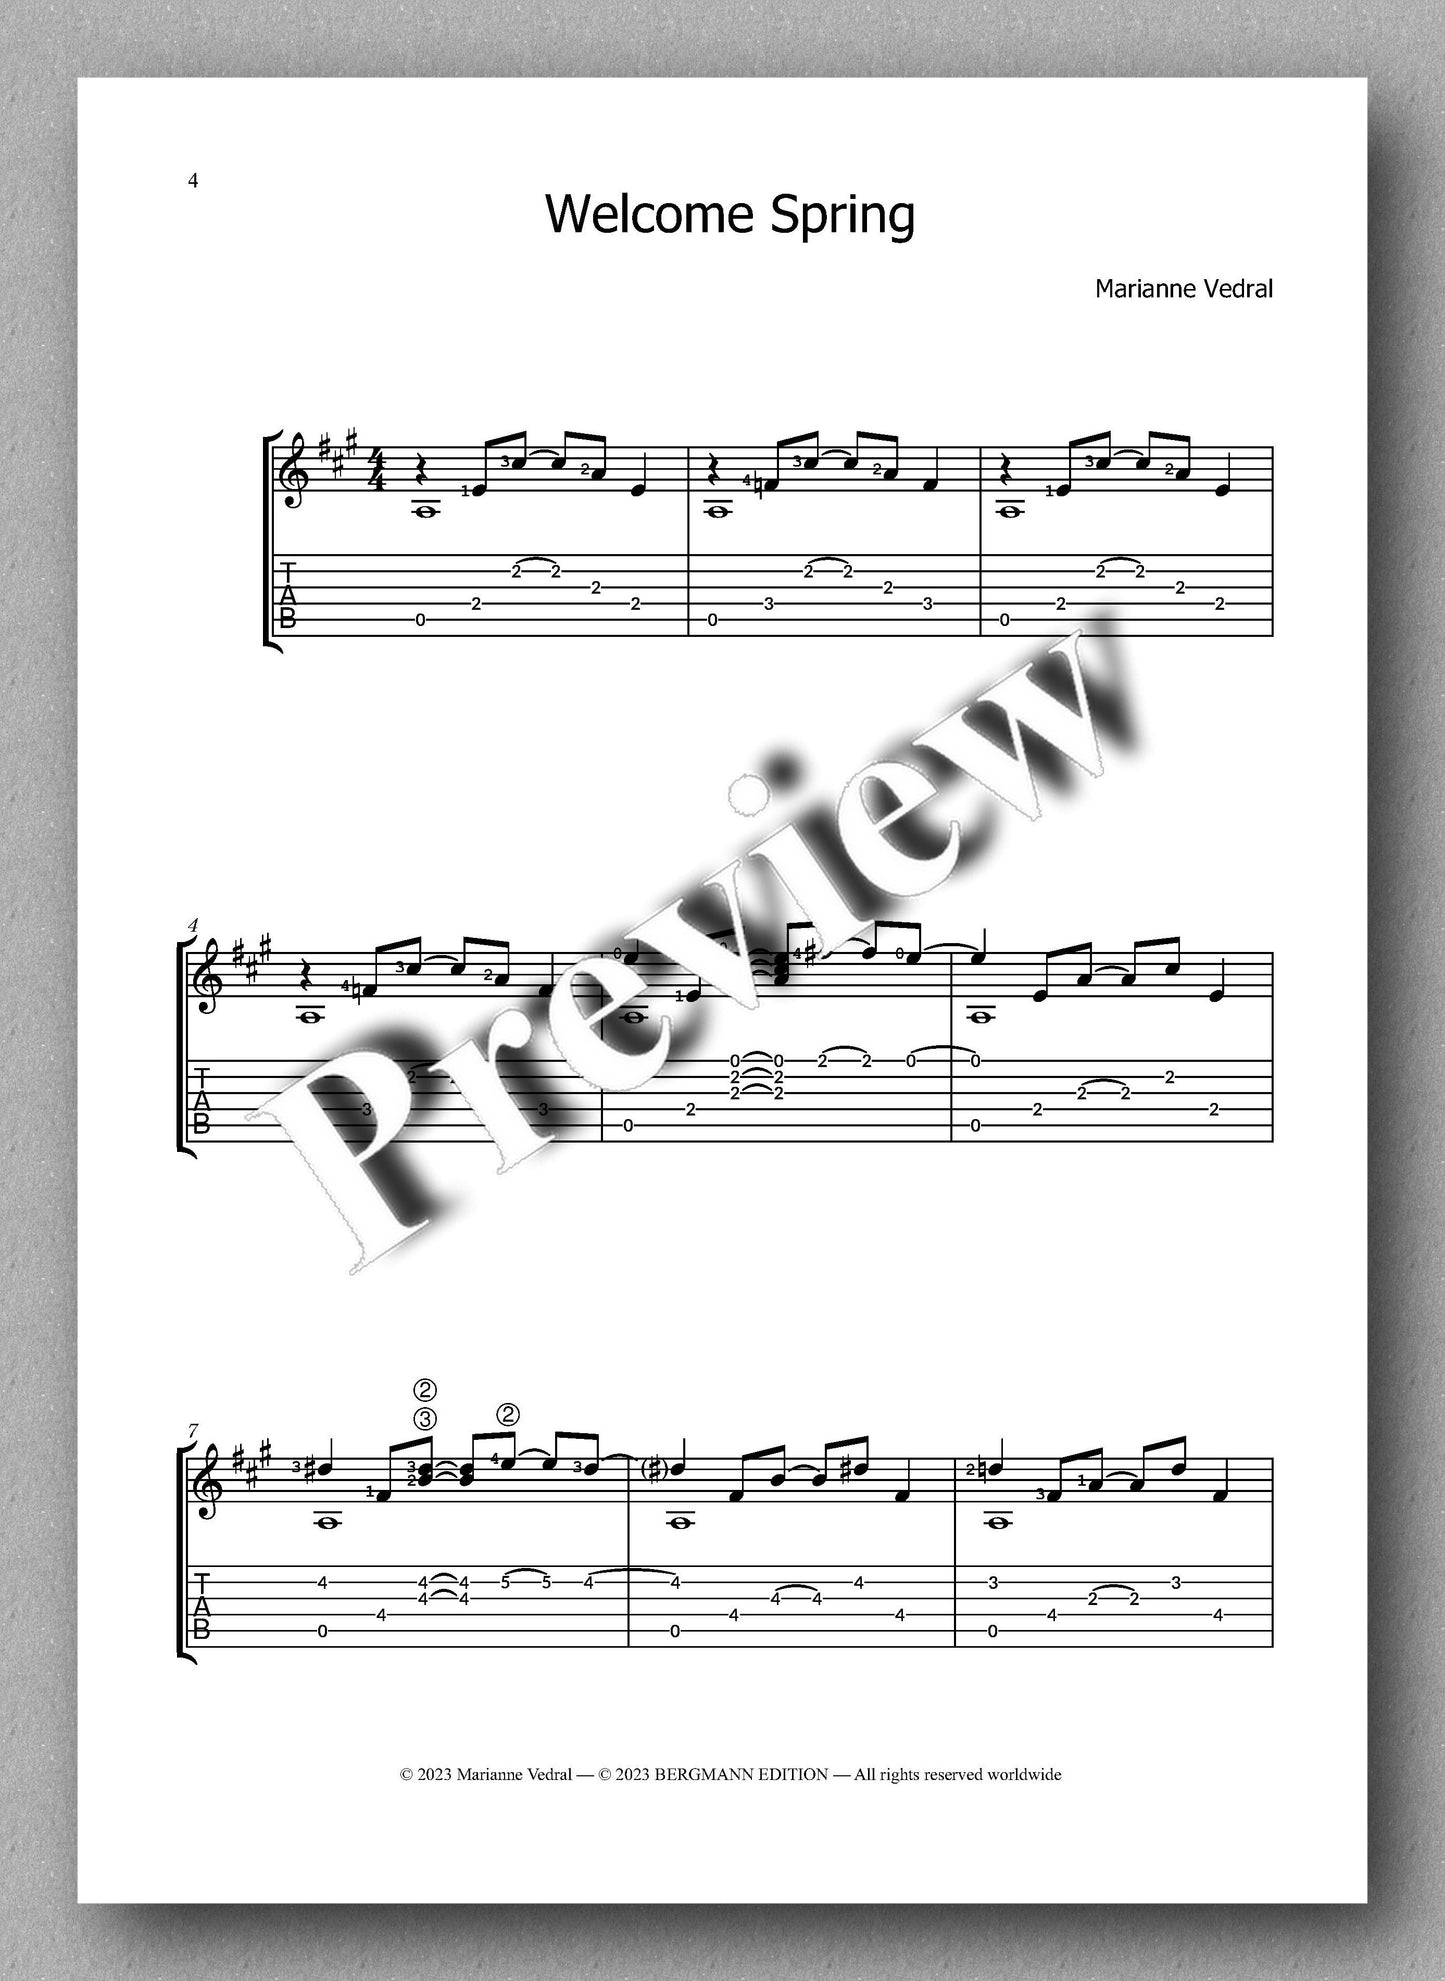 Welcome Spring (Score incl. TAB) by Marianne Vedral - preview of the music score 1